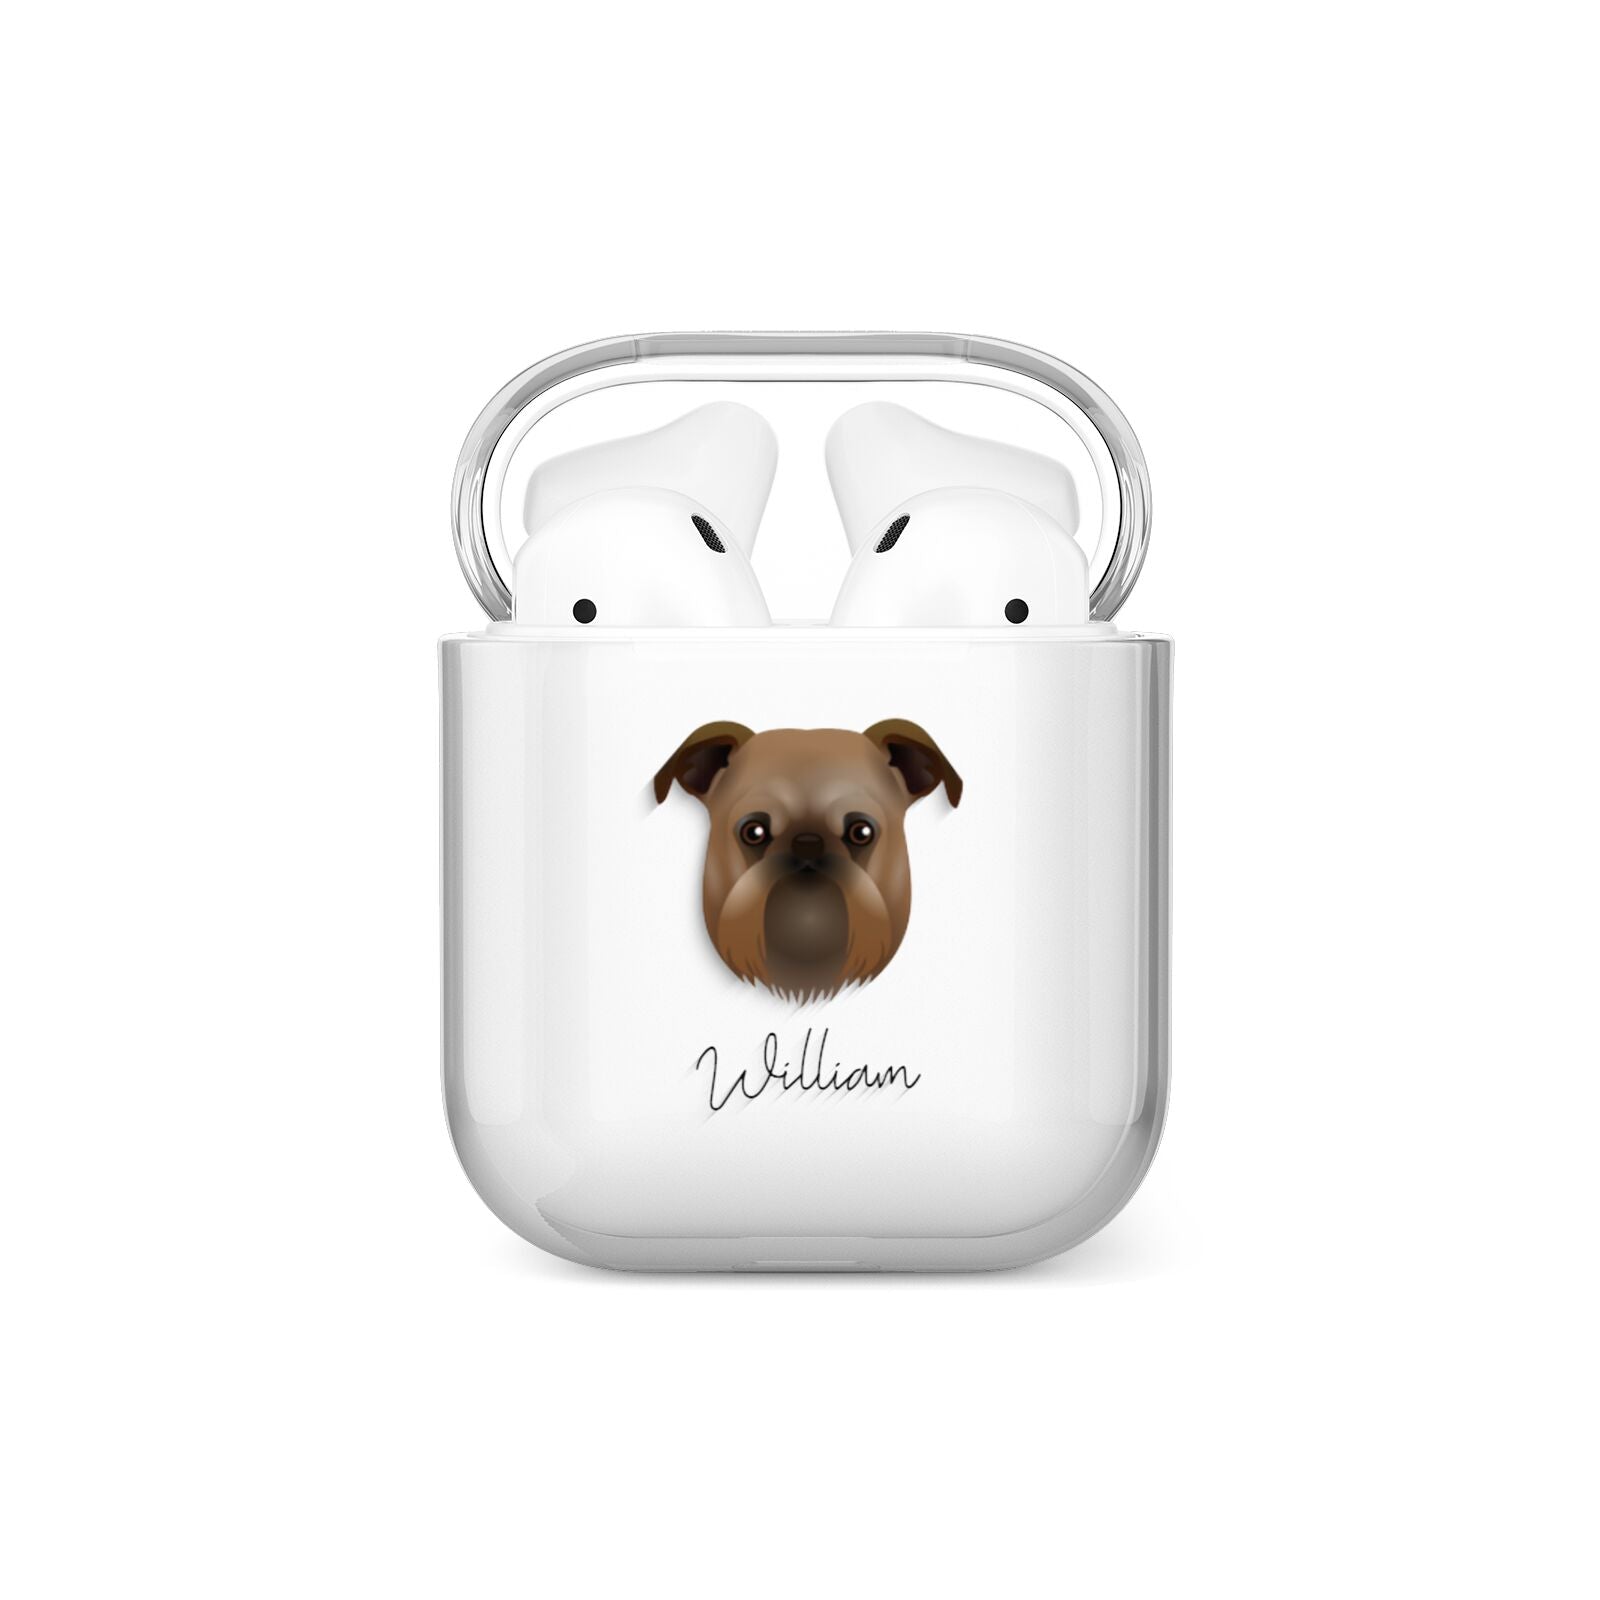 Griffon Bruxellois Personalised AirPods Case